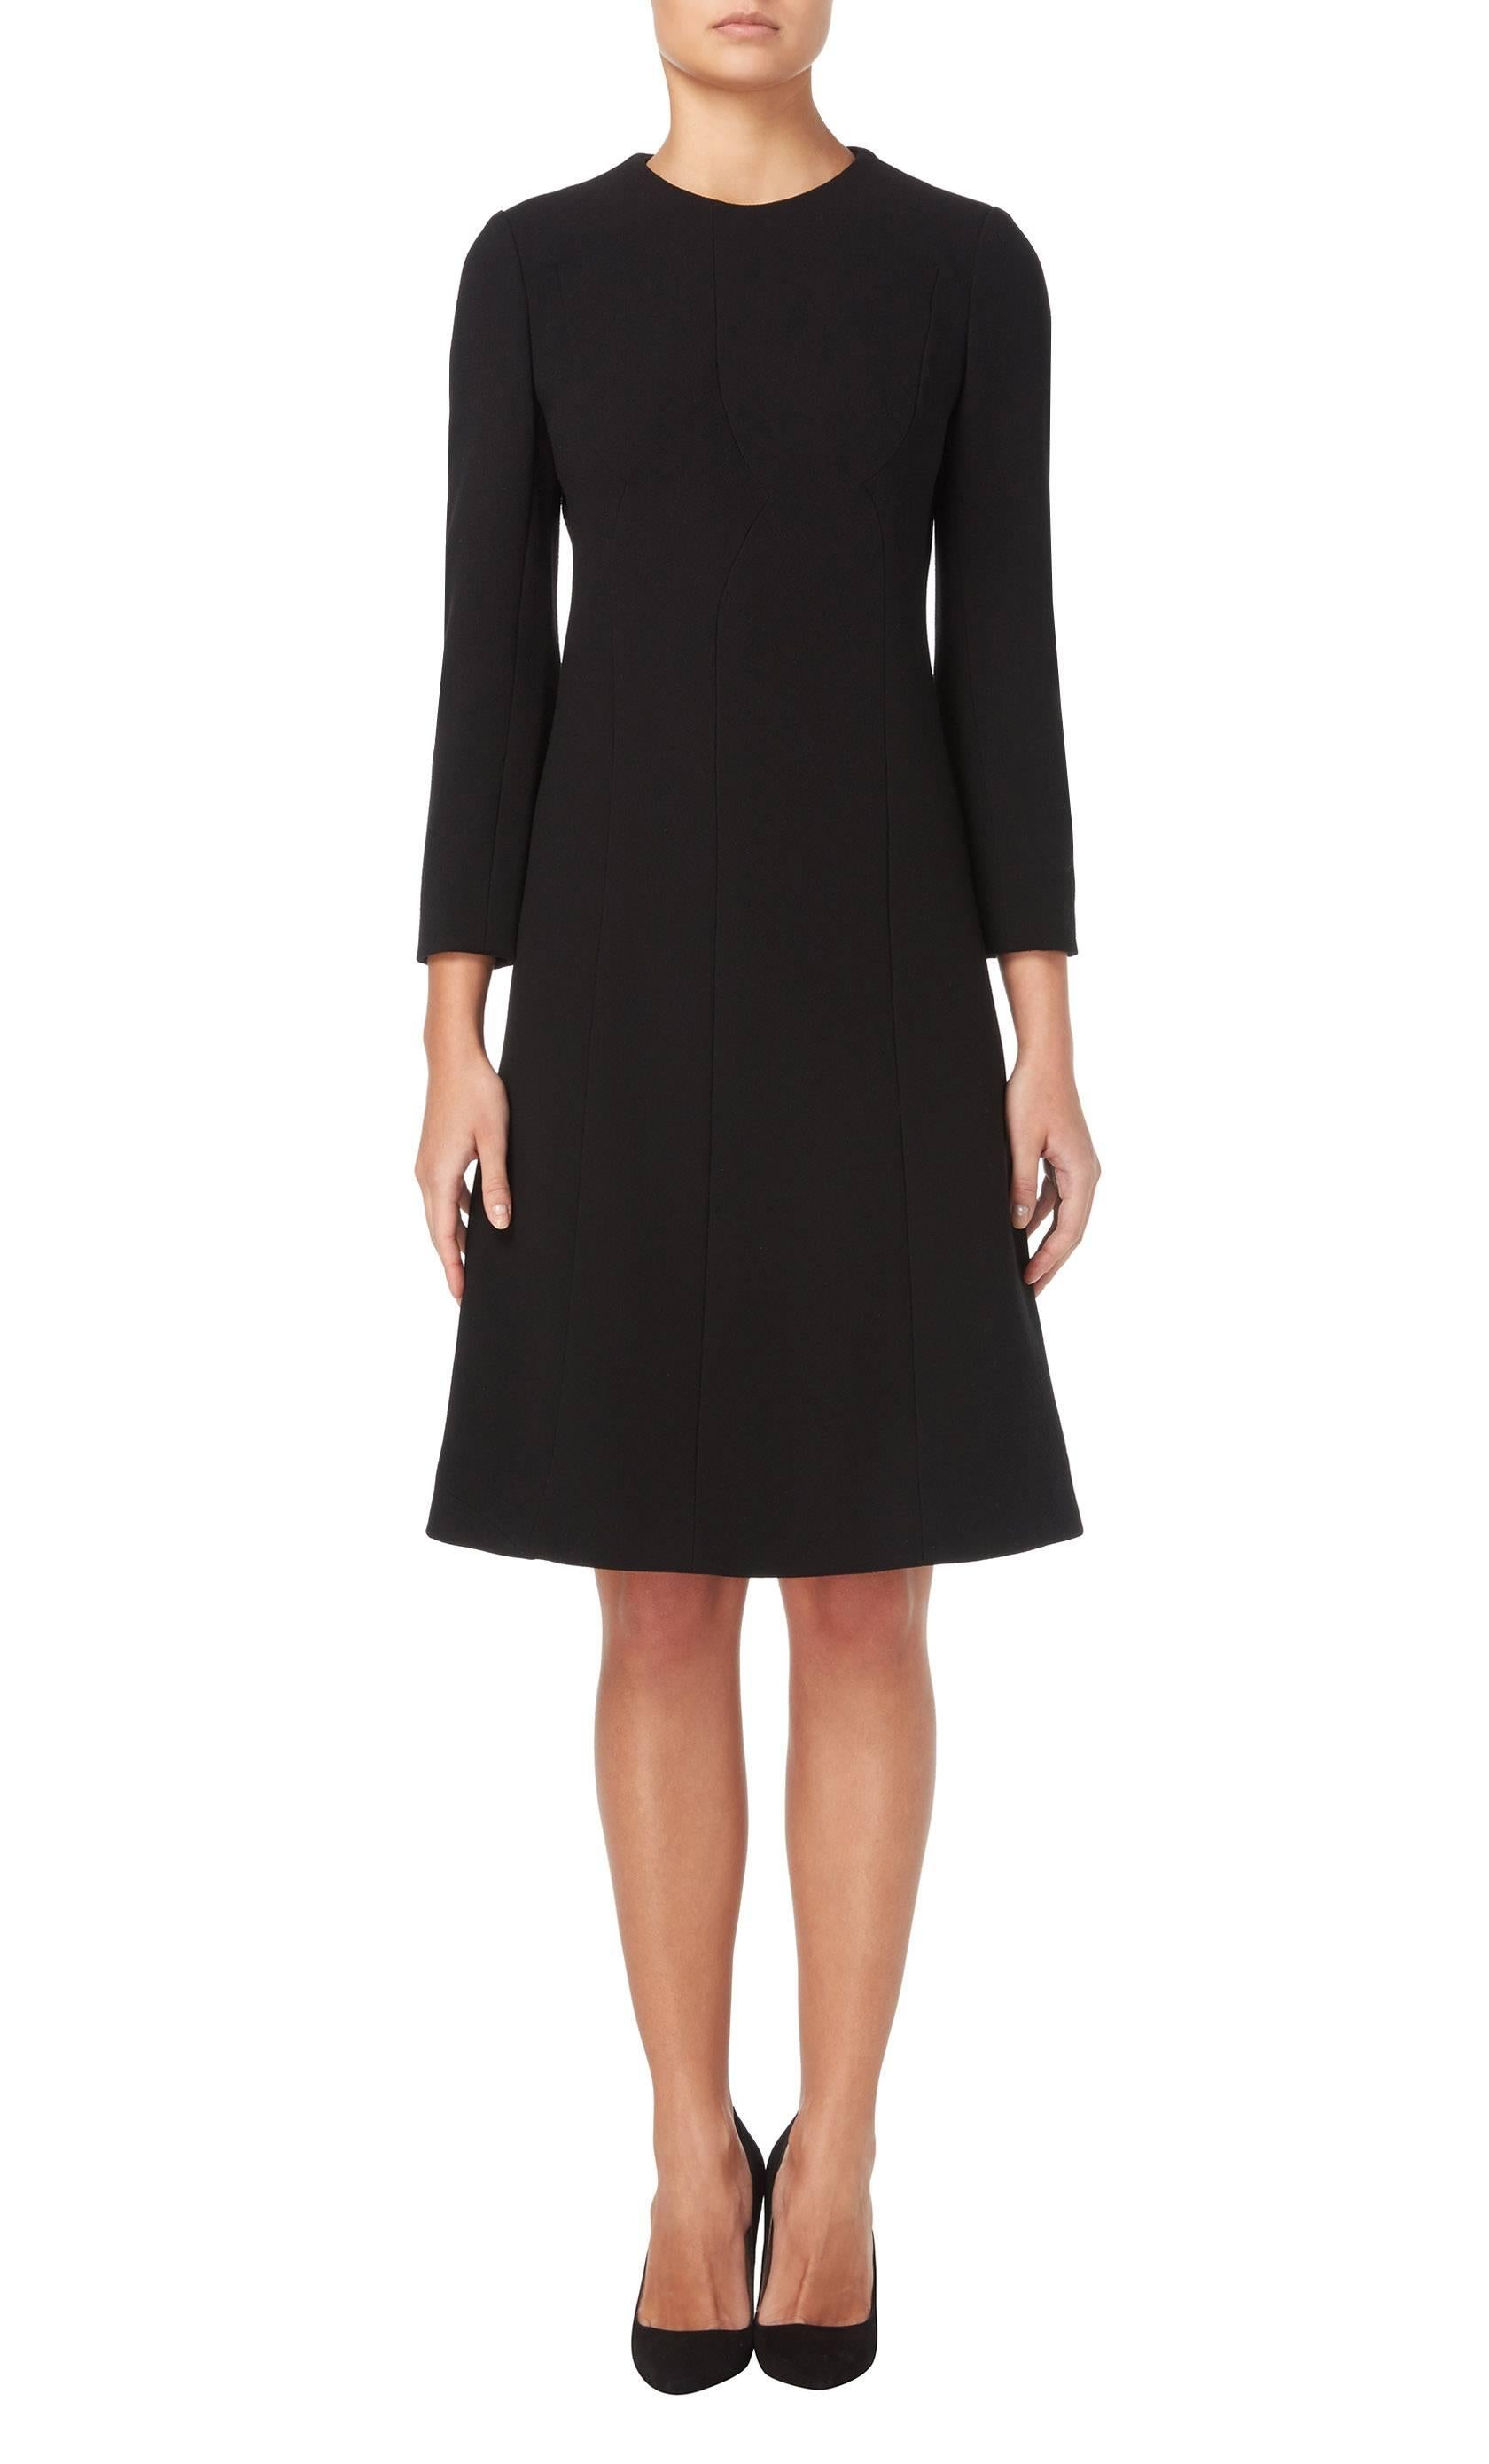 An incredibly chic LBD, this Galanos dress is a timeless piece that will go from day to night with ease. With a high neck and long sleeves, and bracelet length sleeves, the dress features curved seam detailing to the front, enhancing the